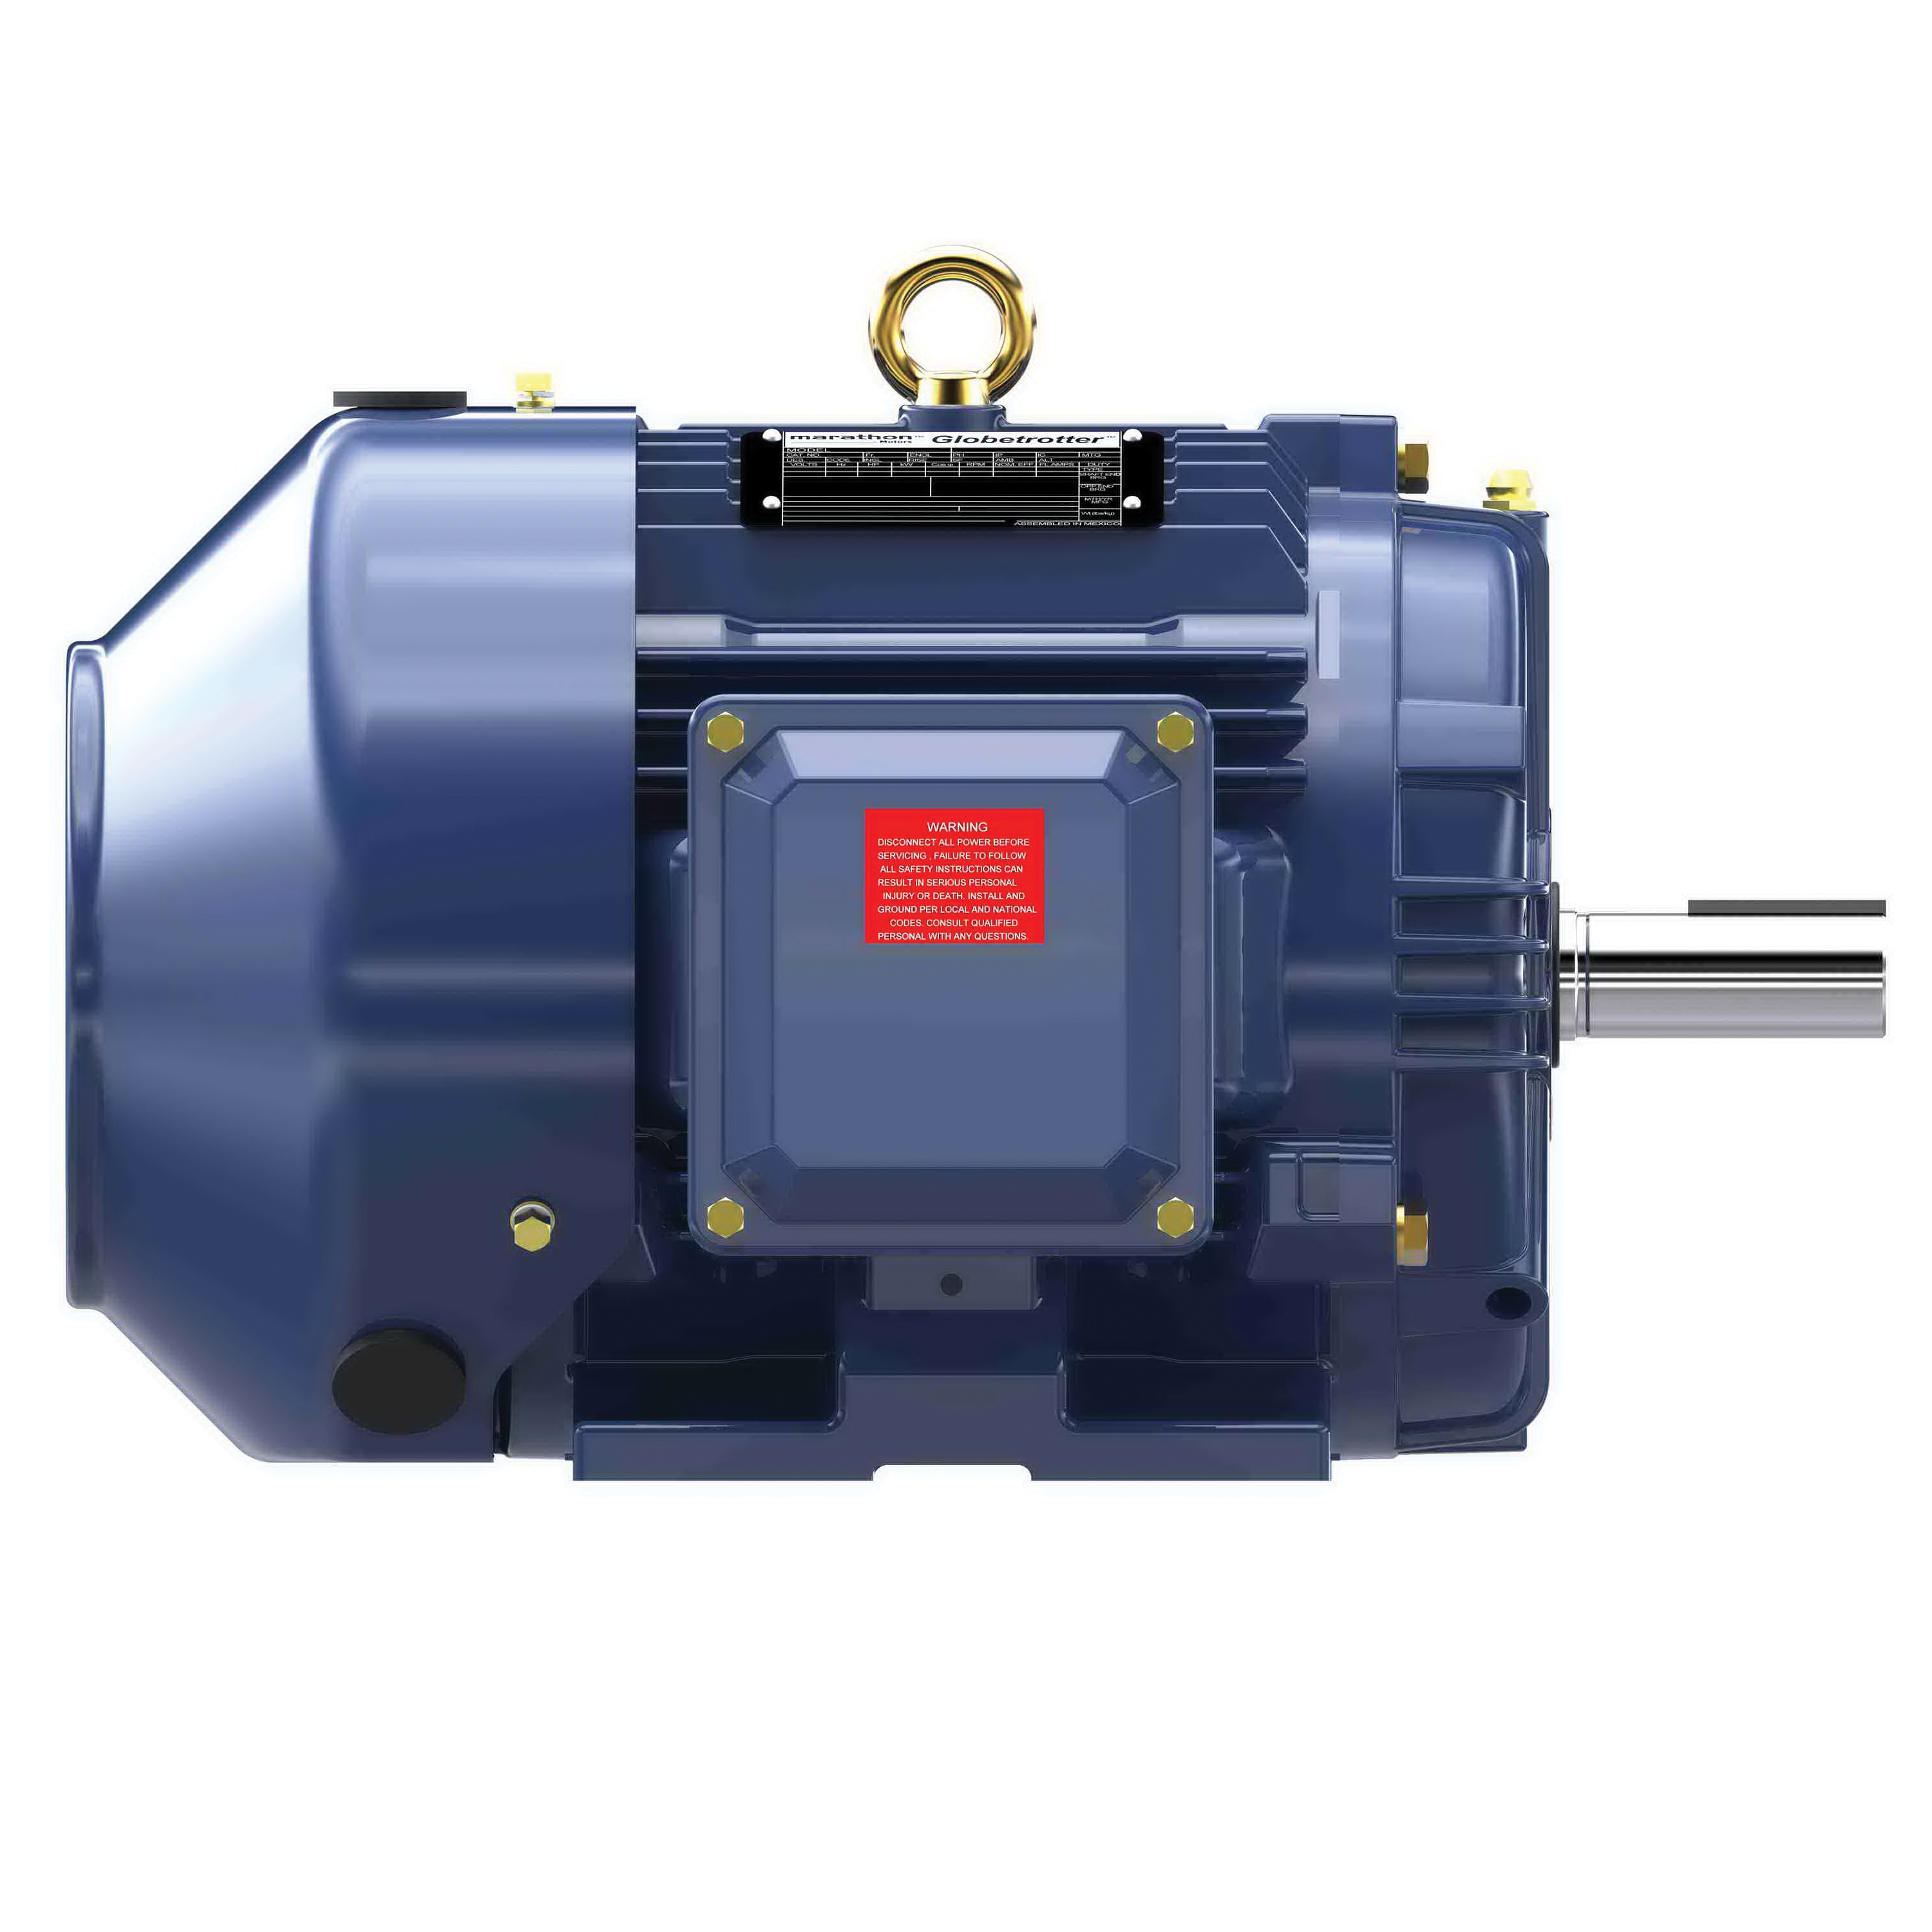 Marathon® Globetrotter® GT1010A General Purpose Motor, 208 to 230/460 V, 4.2/8.3 to 8.6 A, 2.2 kW, 3 hp, 60 Hz